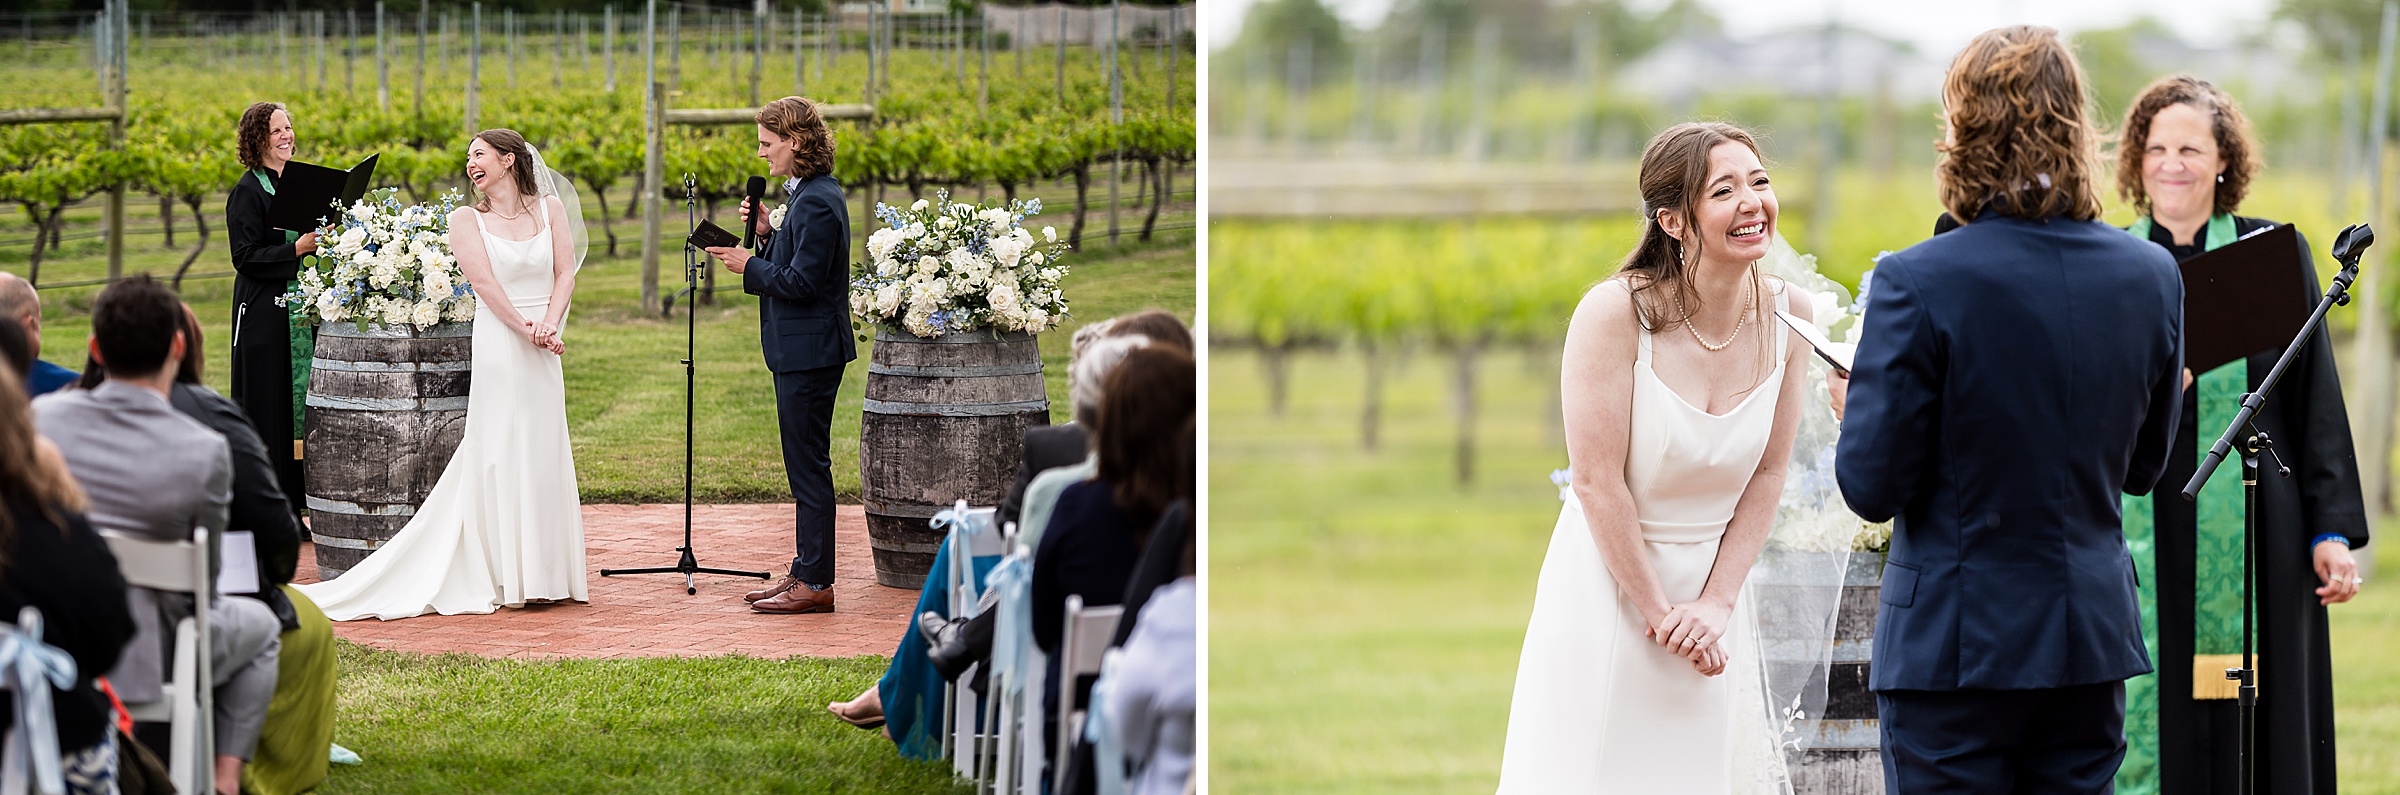 A wedding couple stands at an outdoor ceremony in a vineyard. The bride is in a white dress, and the groom in a navy suit. An officiant stands beside them. White flowers decorate wooden barrels nearby.